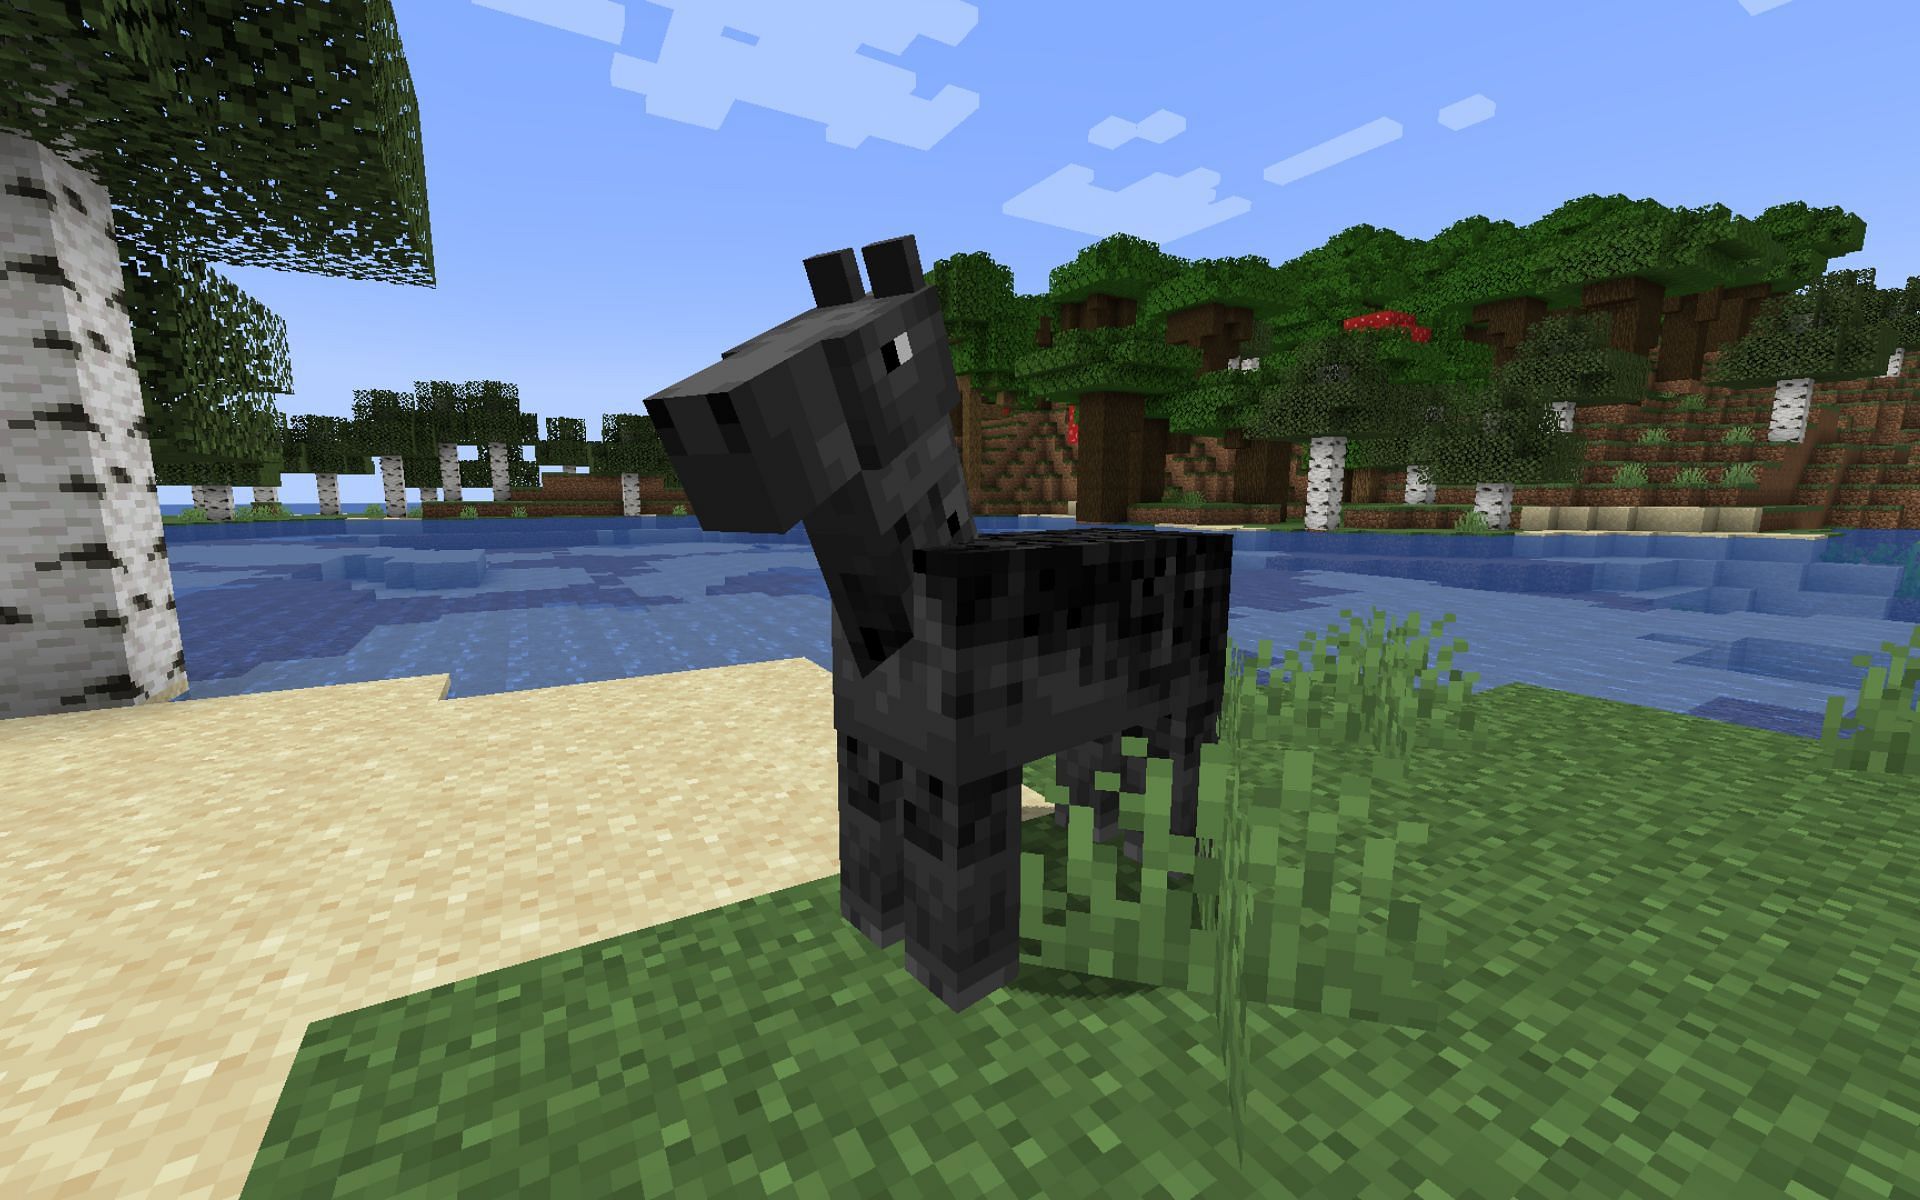 The horse is one of the oldest mobs in the game (Image via Minecraft)